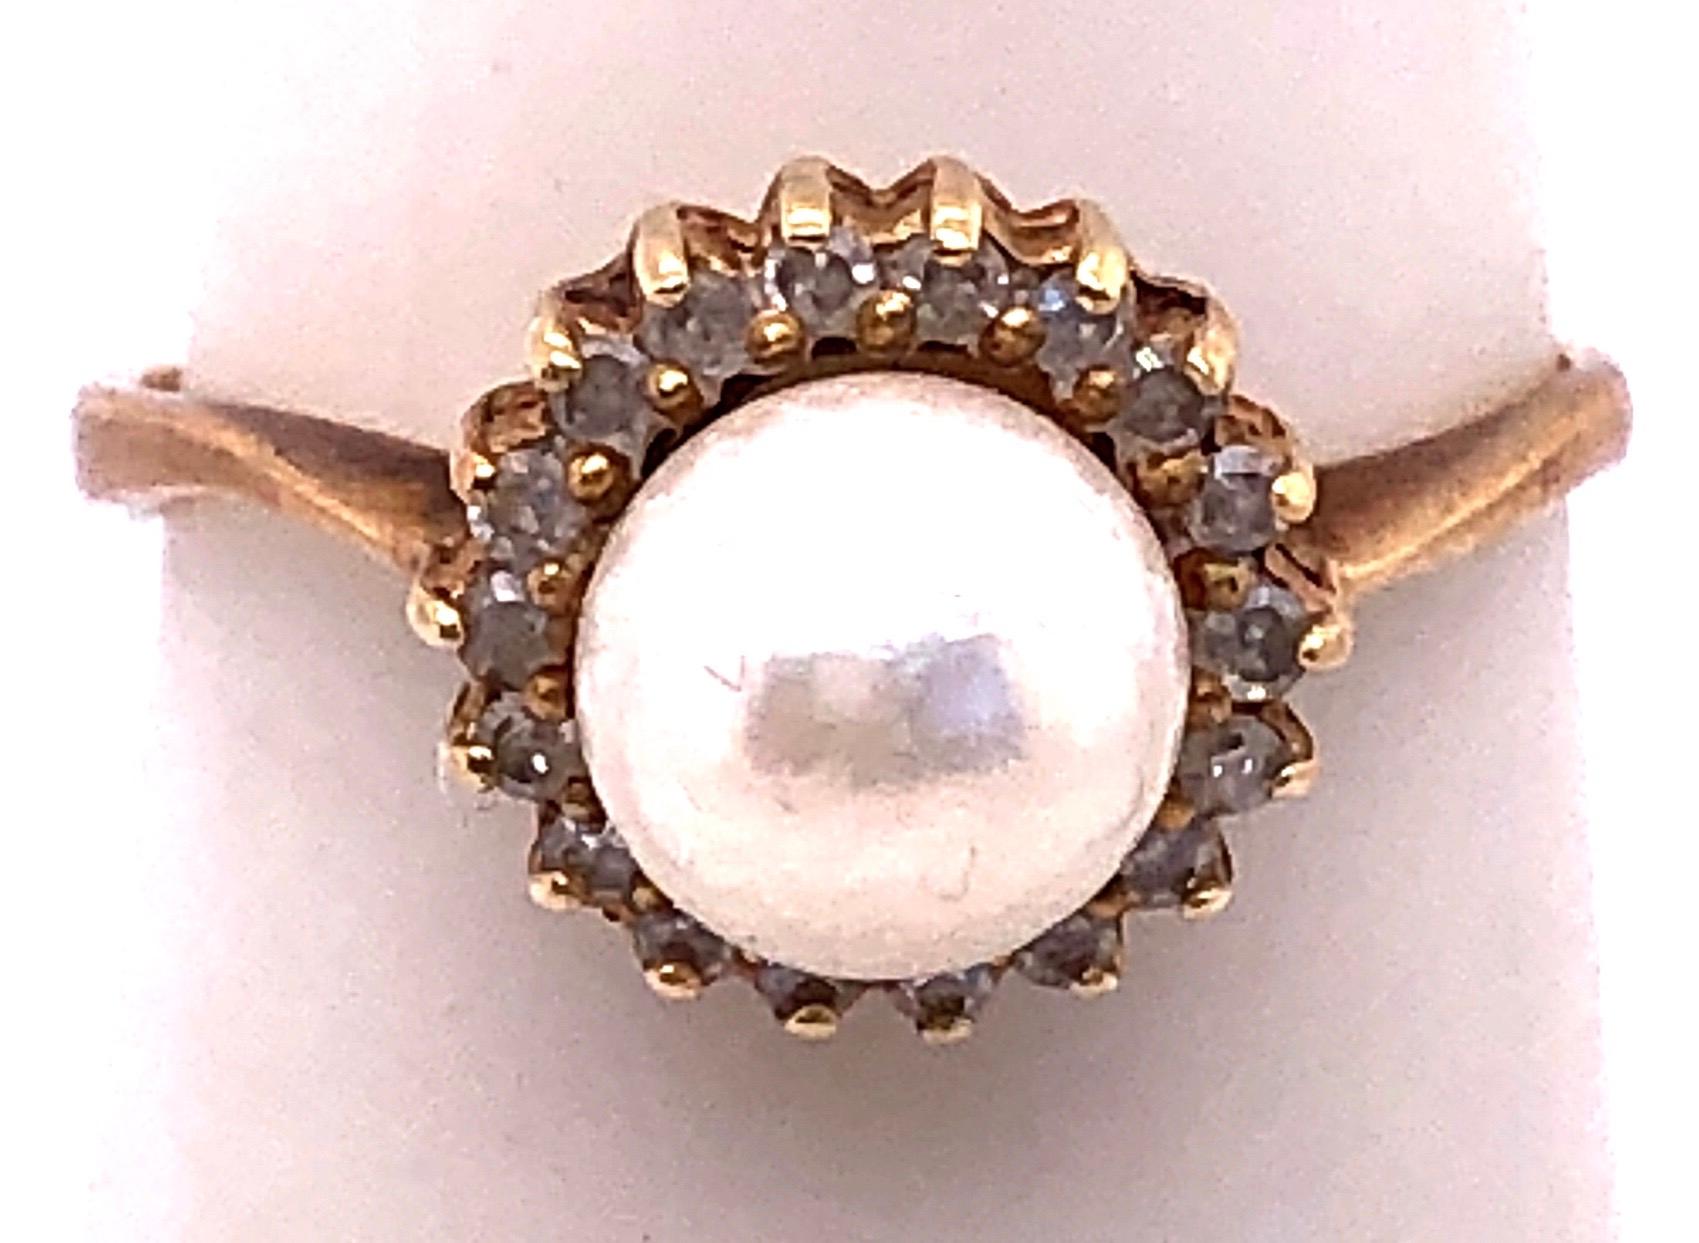 14 Karat Yellow Gold Fashion Pearl Ring with Diamonds Size 6.75.
5 mm diameter pearl.
2.4 grams total weight.
